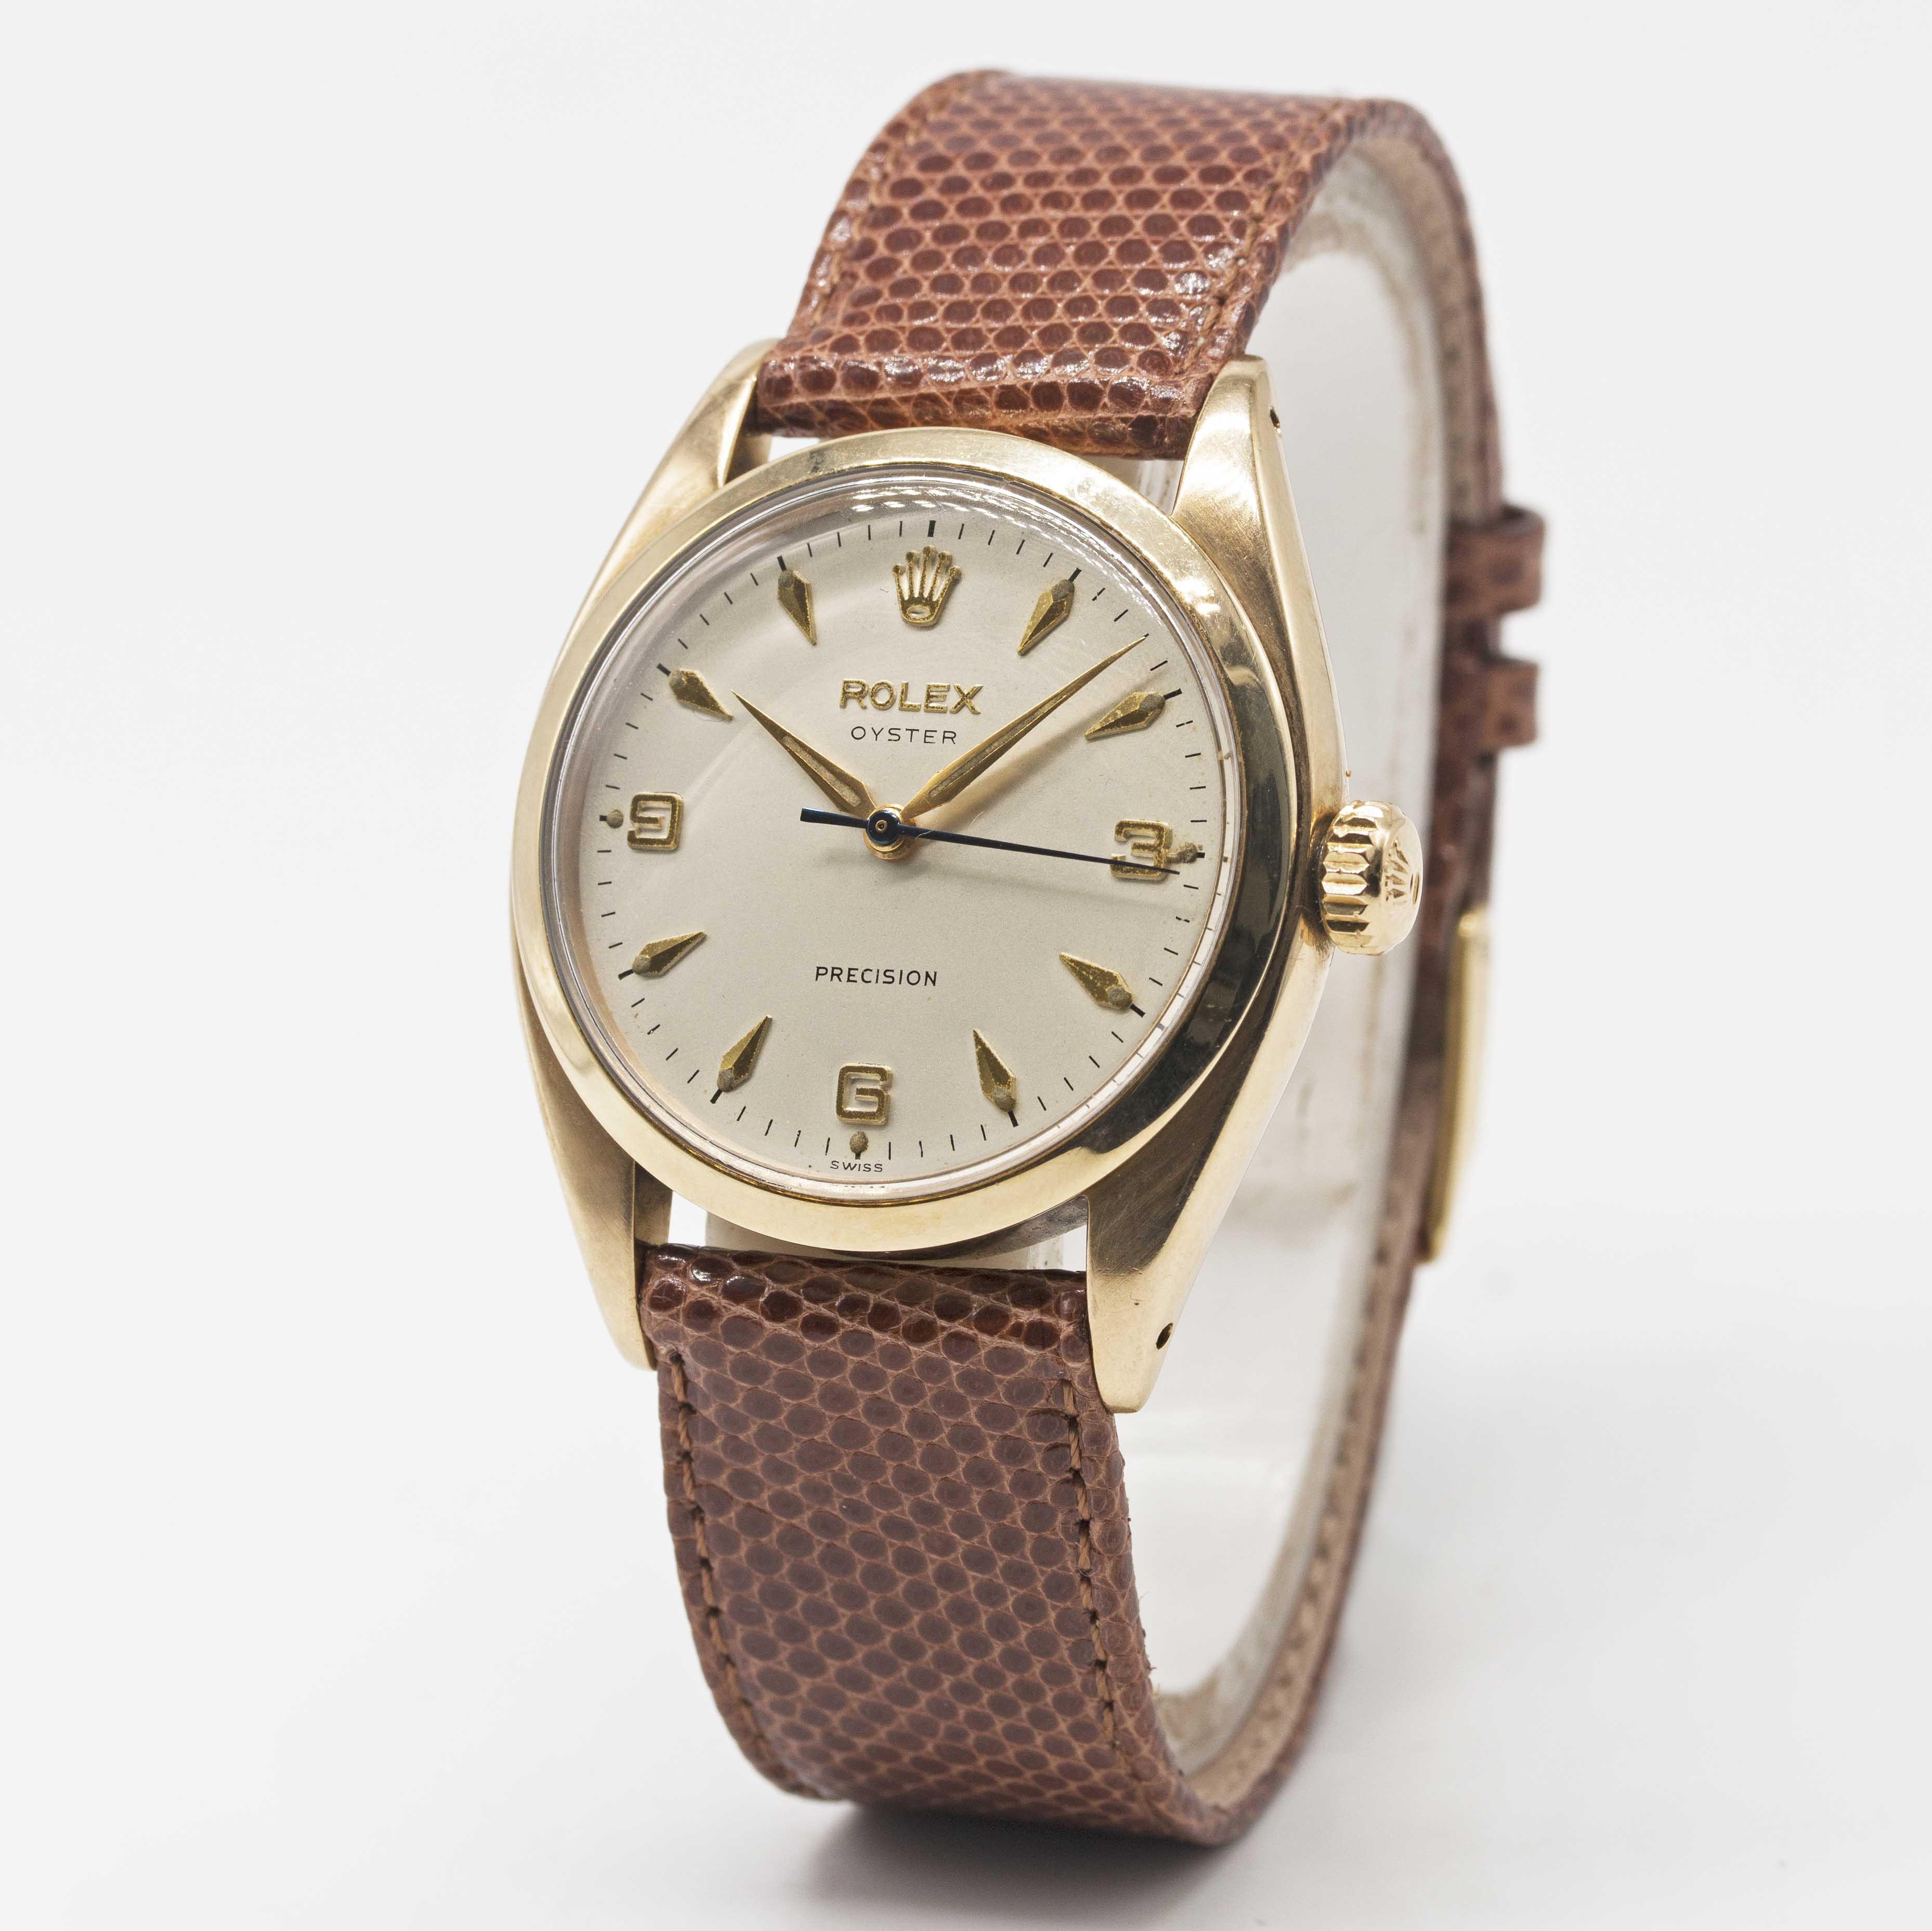 A GENTLEMAN'S 9CT SOLID GOLD ROLEX OYSTER PRECISION WRIST WATCH CIRCA 1959, REF. 6426 WITH 3-6-9 " - Image 3 of 8